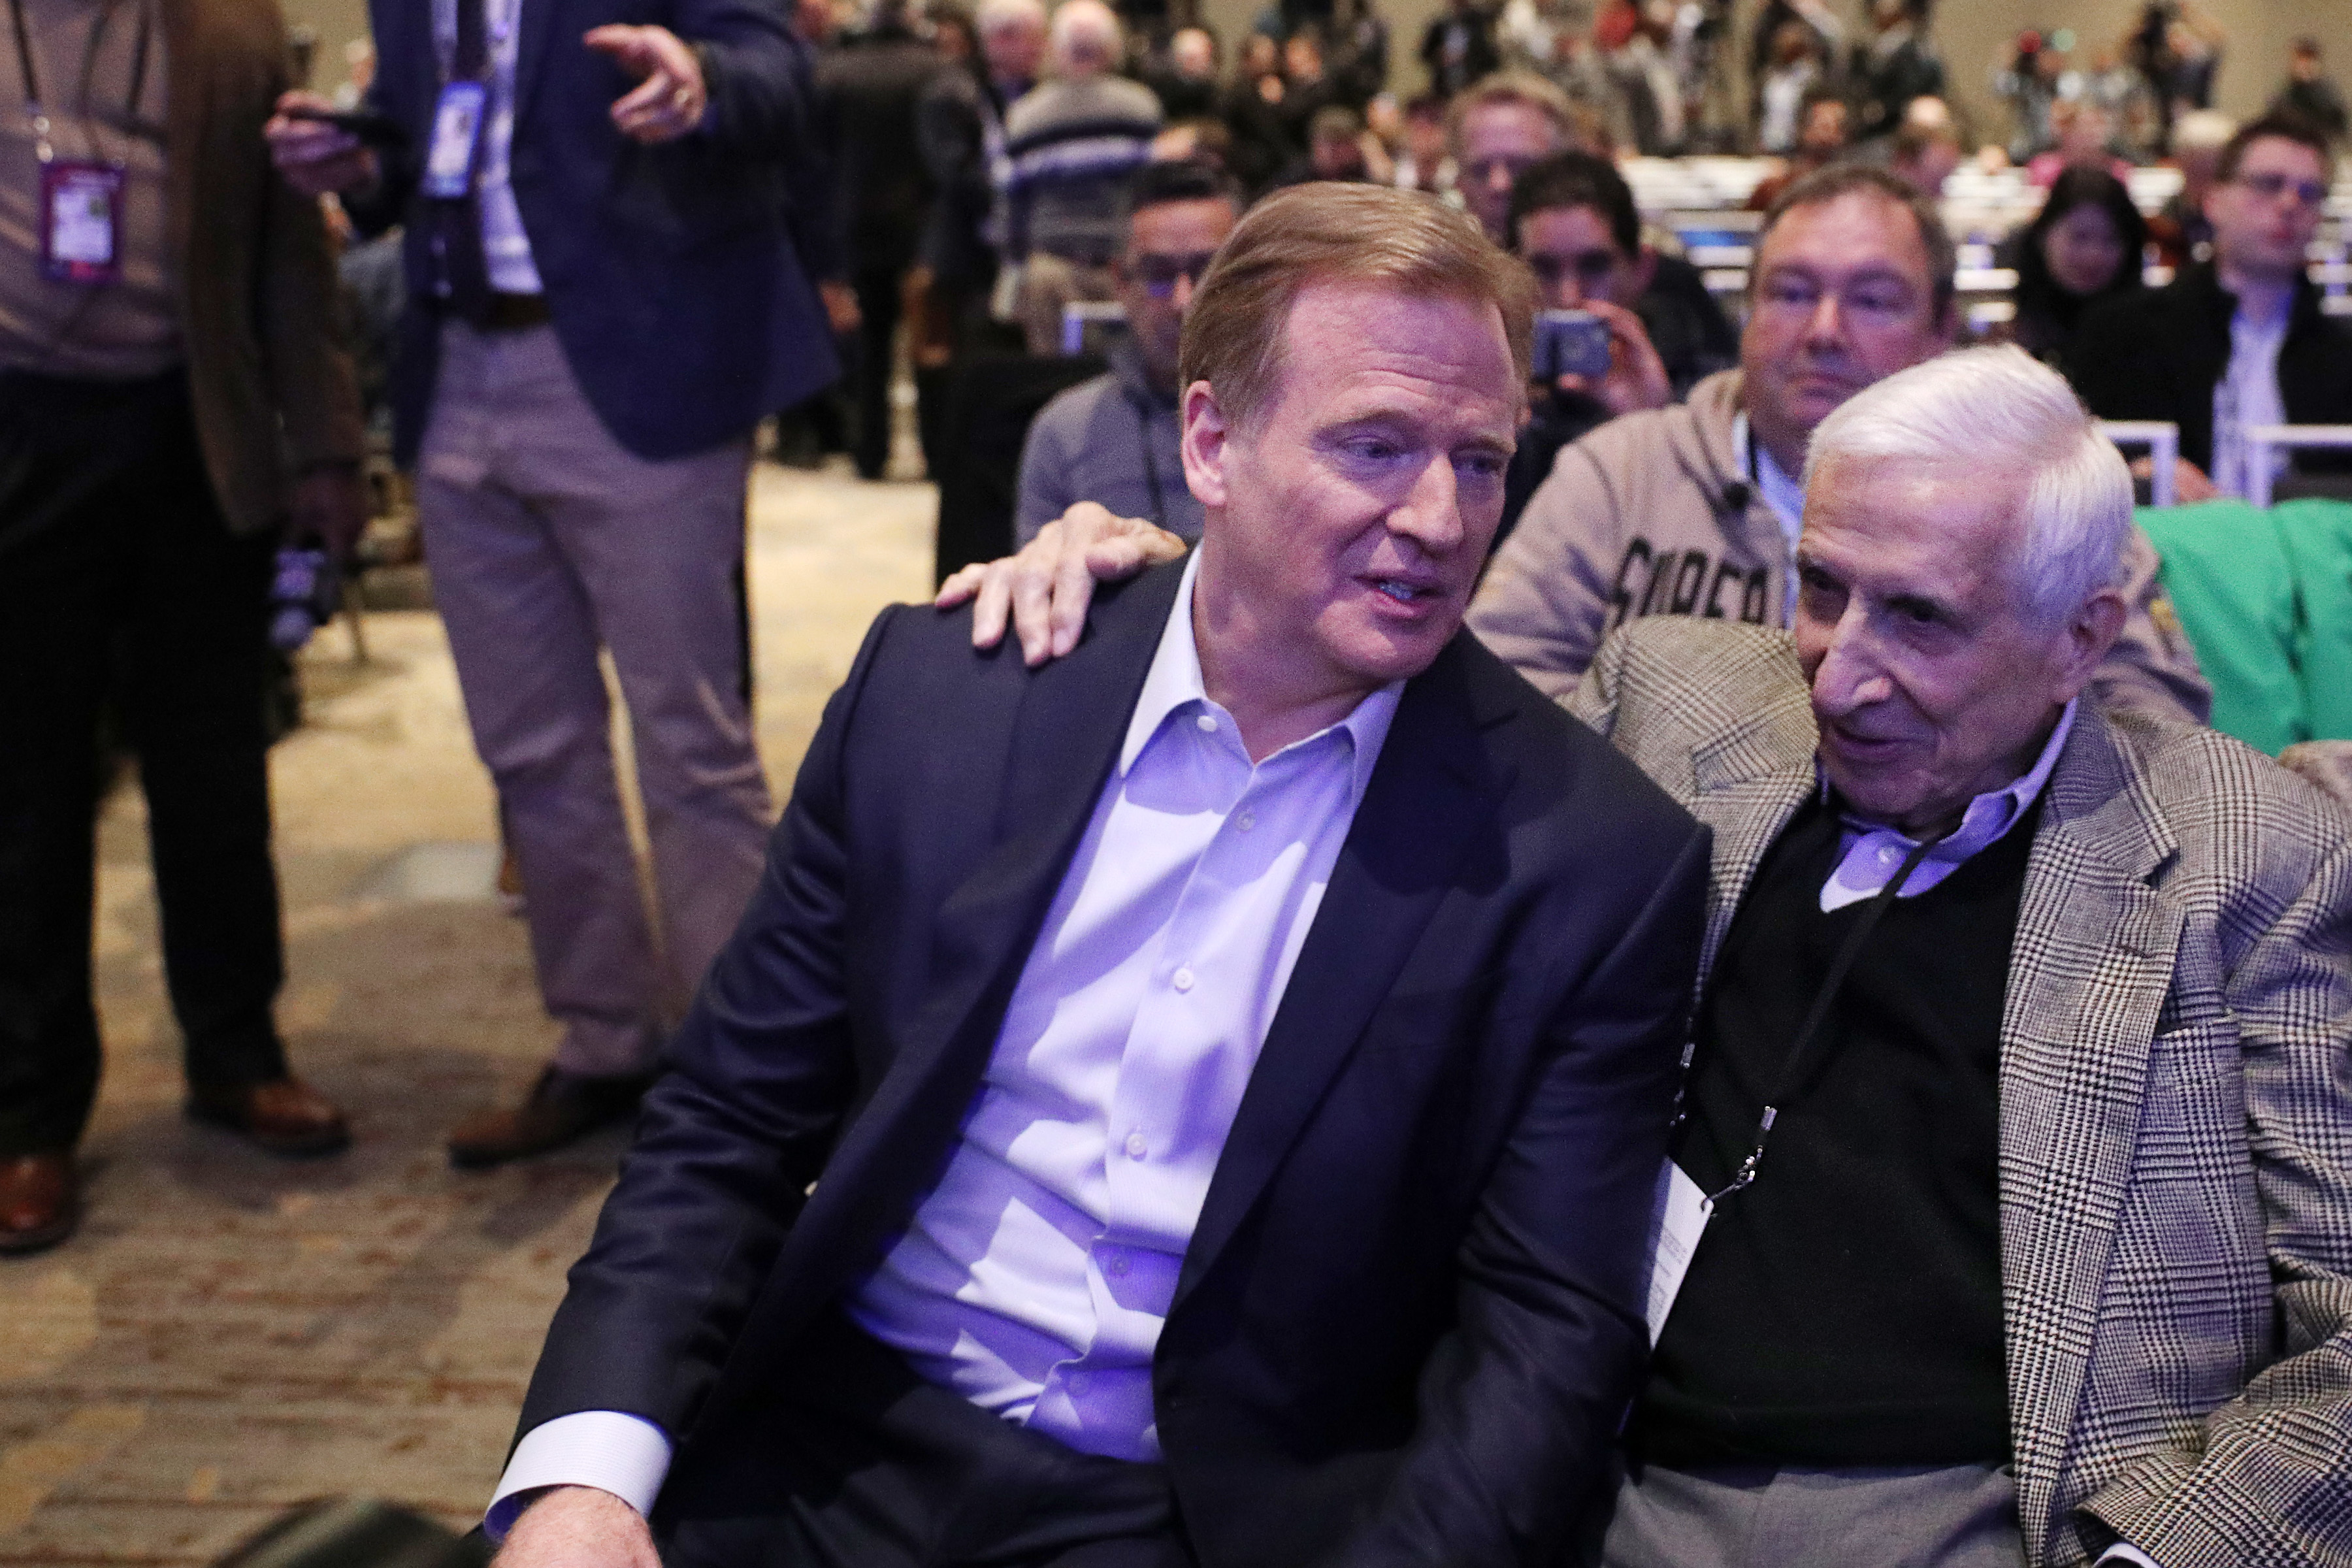 NFL Commissioner Roger Goodell recognized 97-year-old columnist Sid Hartman during Goodell's annual "State of the NFL" news conference.